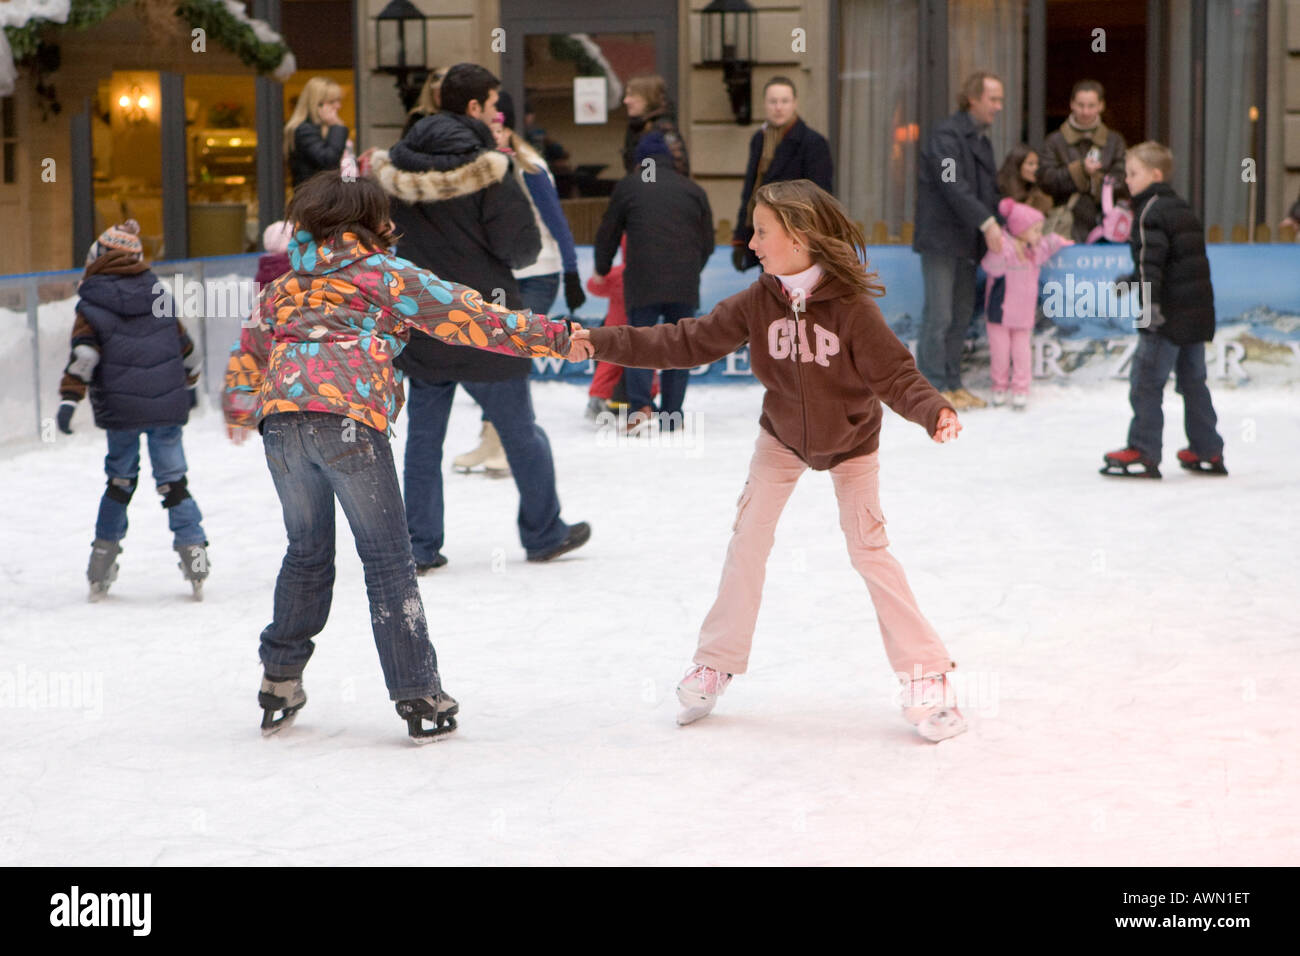 Children skating on artificial rink in the city centre, holding each other's hands, Frankfurt, Hesse, Germany, Europe Stock Photo